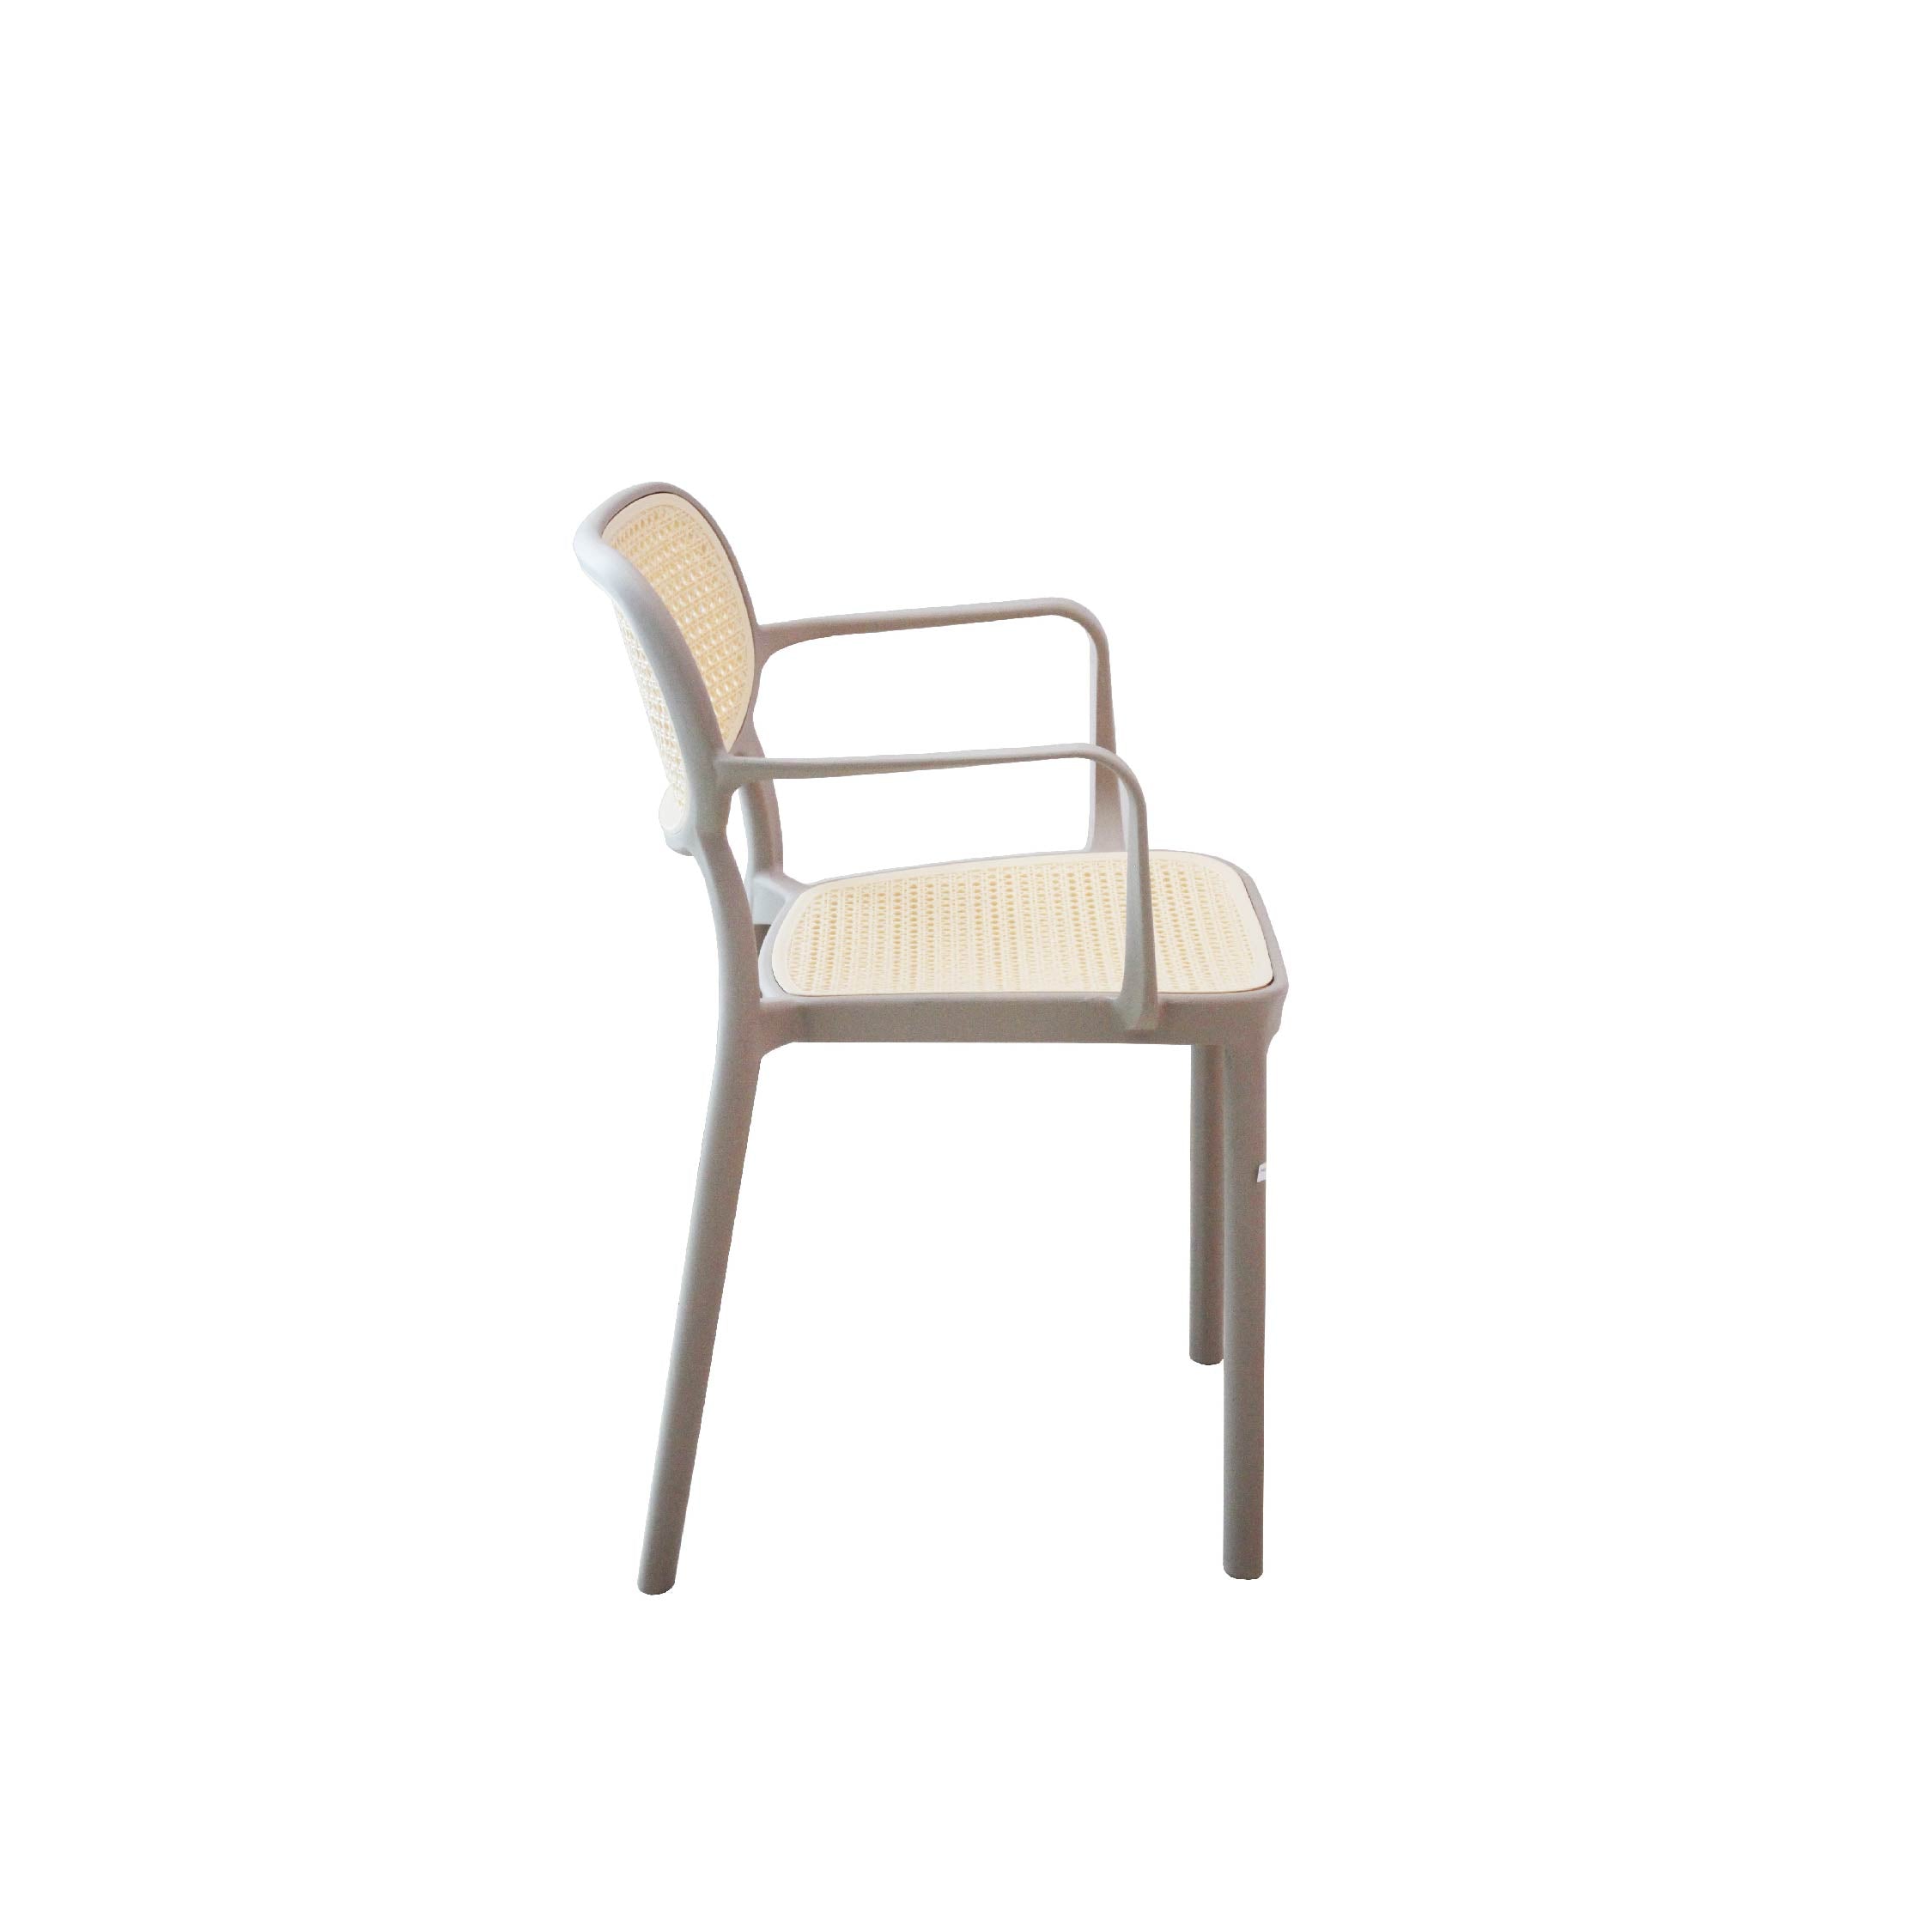 PATI Chair 868 with Arm